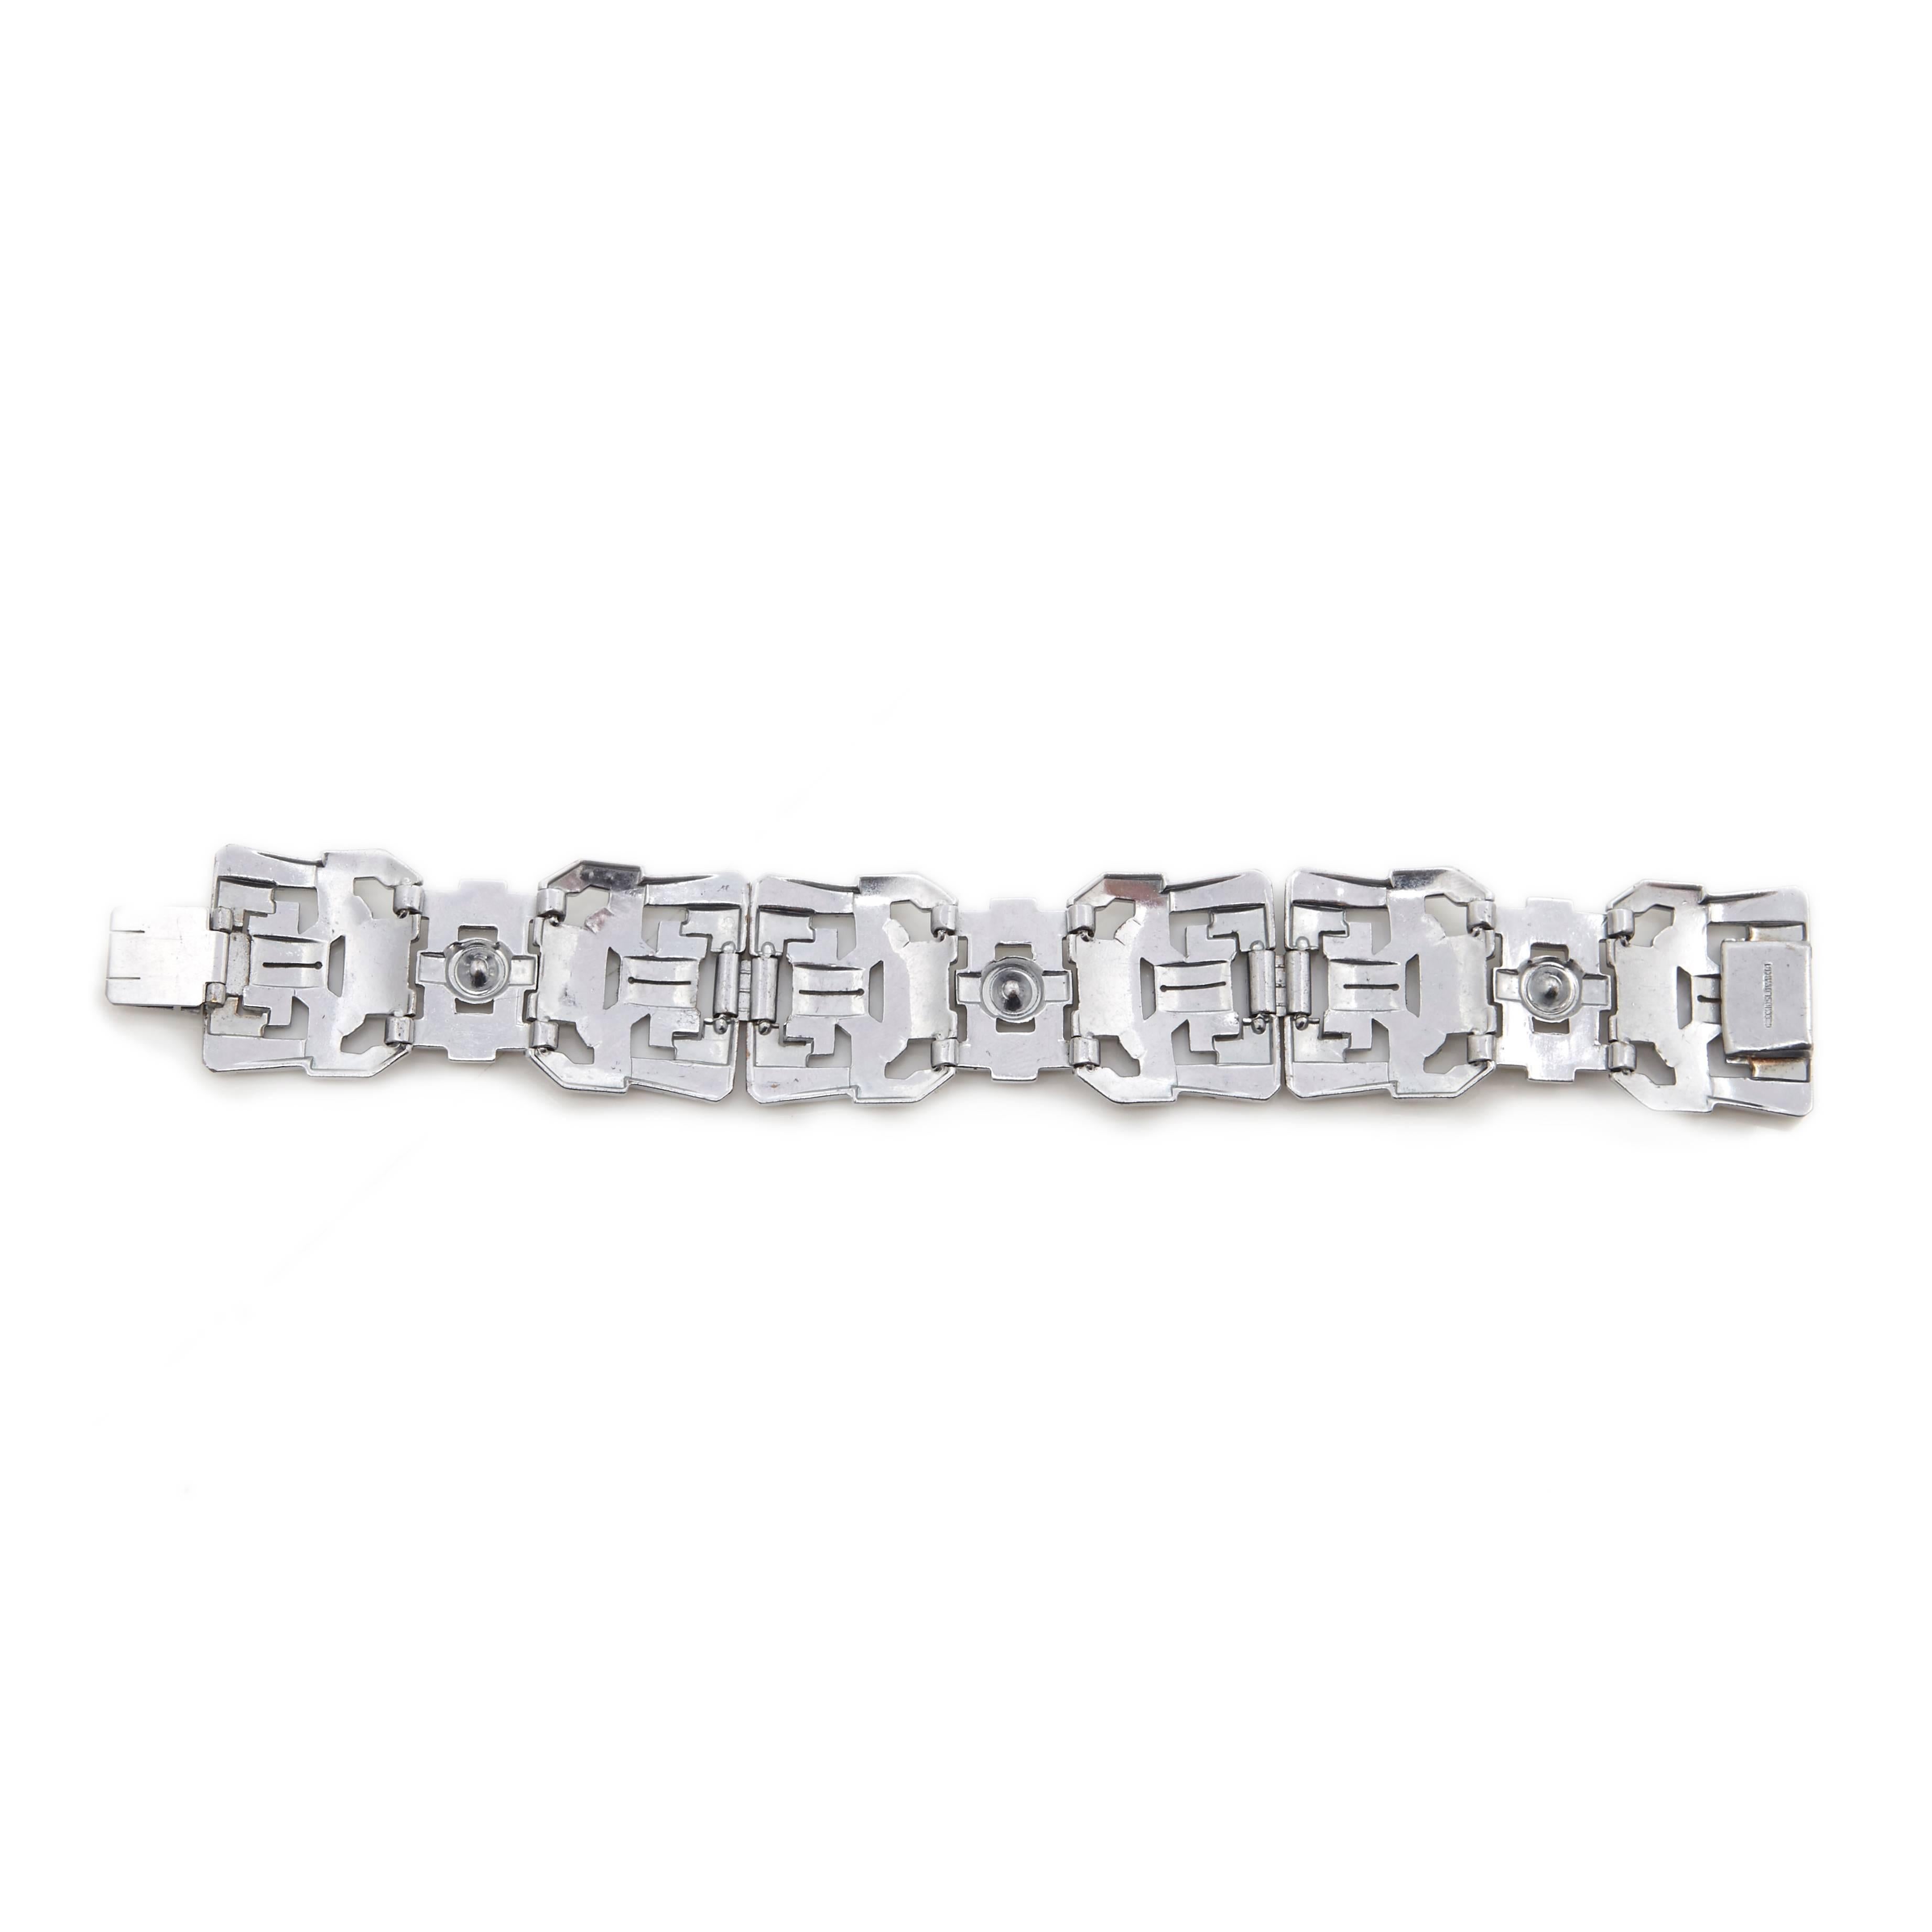 One of the most fantastic Art Deco bracelets we have ever had.

This rare wider width bracelet measures 18cm long, 2.5cm wide.

A genuine Gatsby era bracelet, chrome set with crystal rhinestones and baguettes in a classic pierced openwork